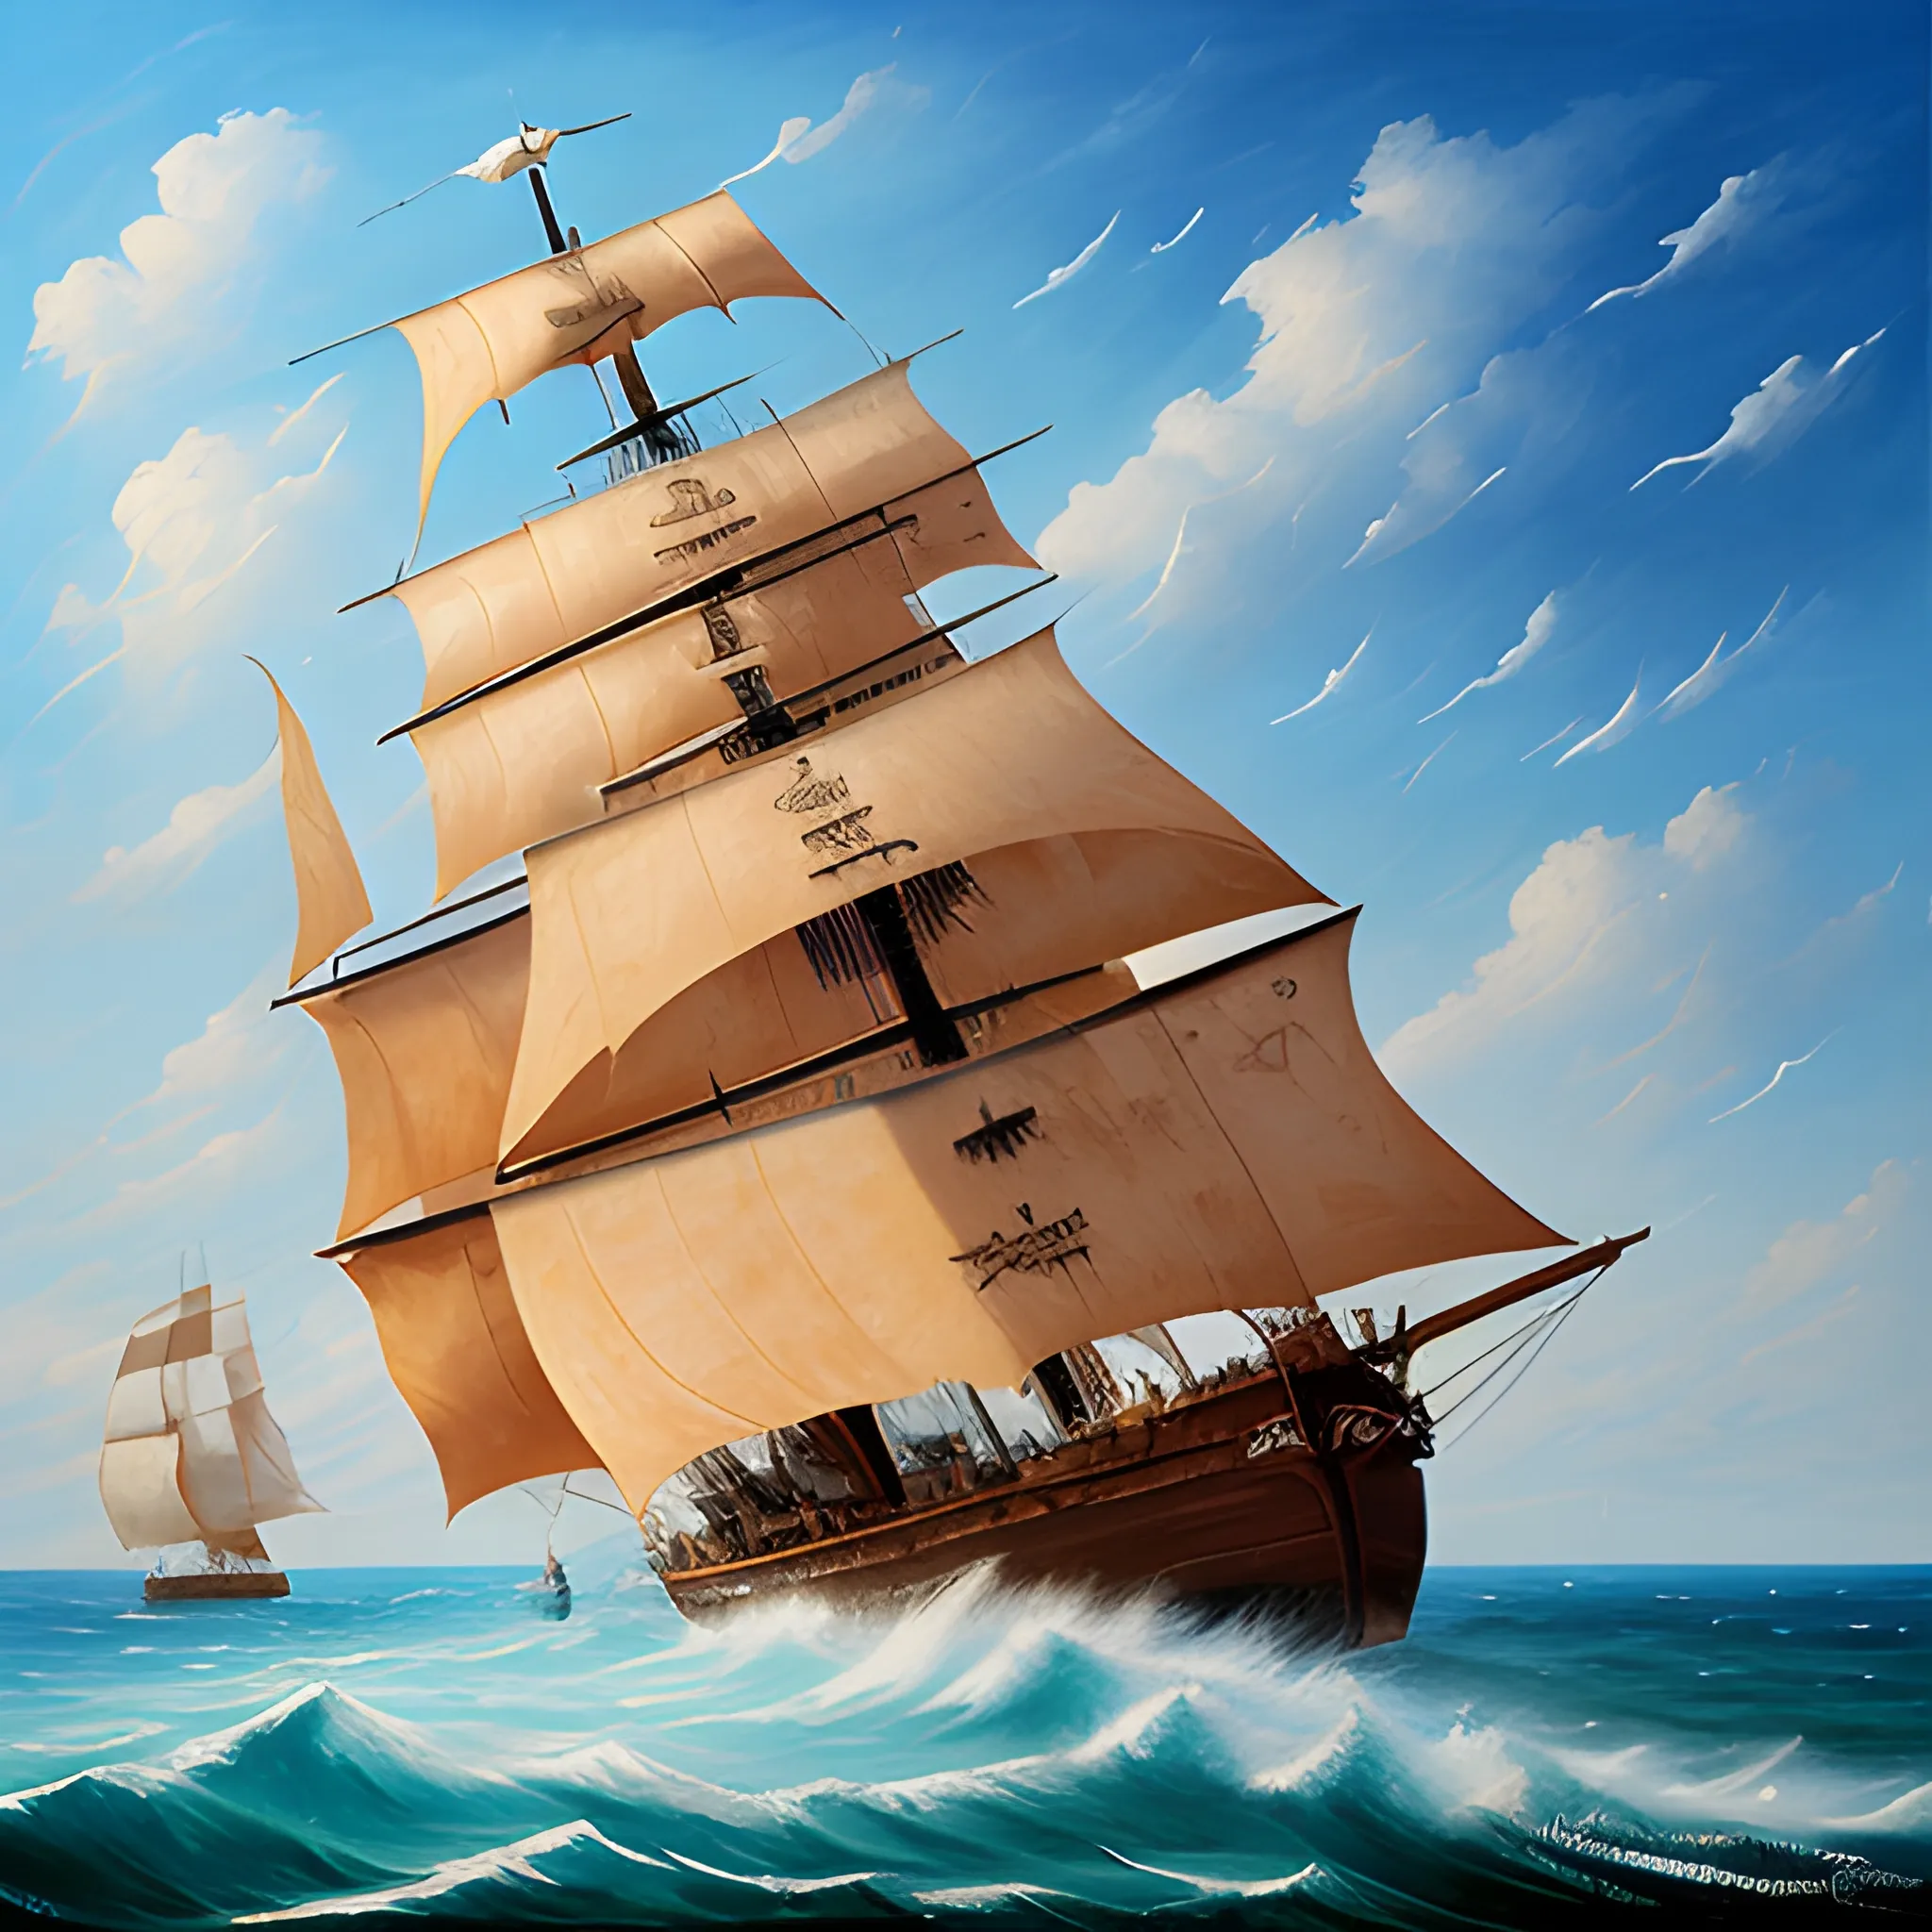 A pirate ship sailing in a wavy sea, thick burlap sails blown with the wind, large ship, full side view of the ship, view from the starboard side of the ship, blue sky, partial clouds, the ship centered in the frame, eye-catching painting, 
rich colors, deep blue sky, painting Vladimir Volegov